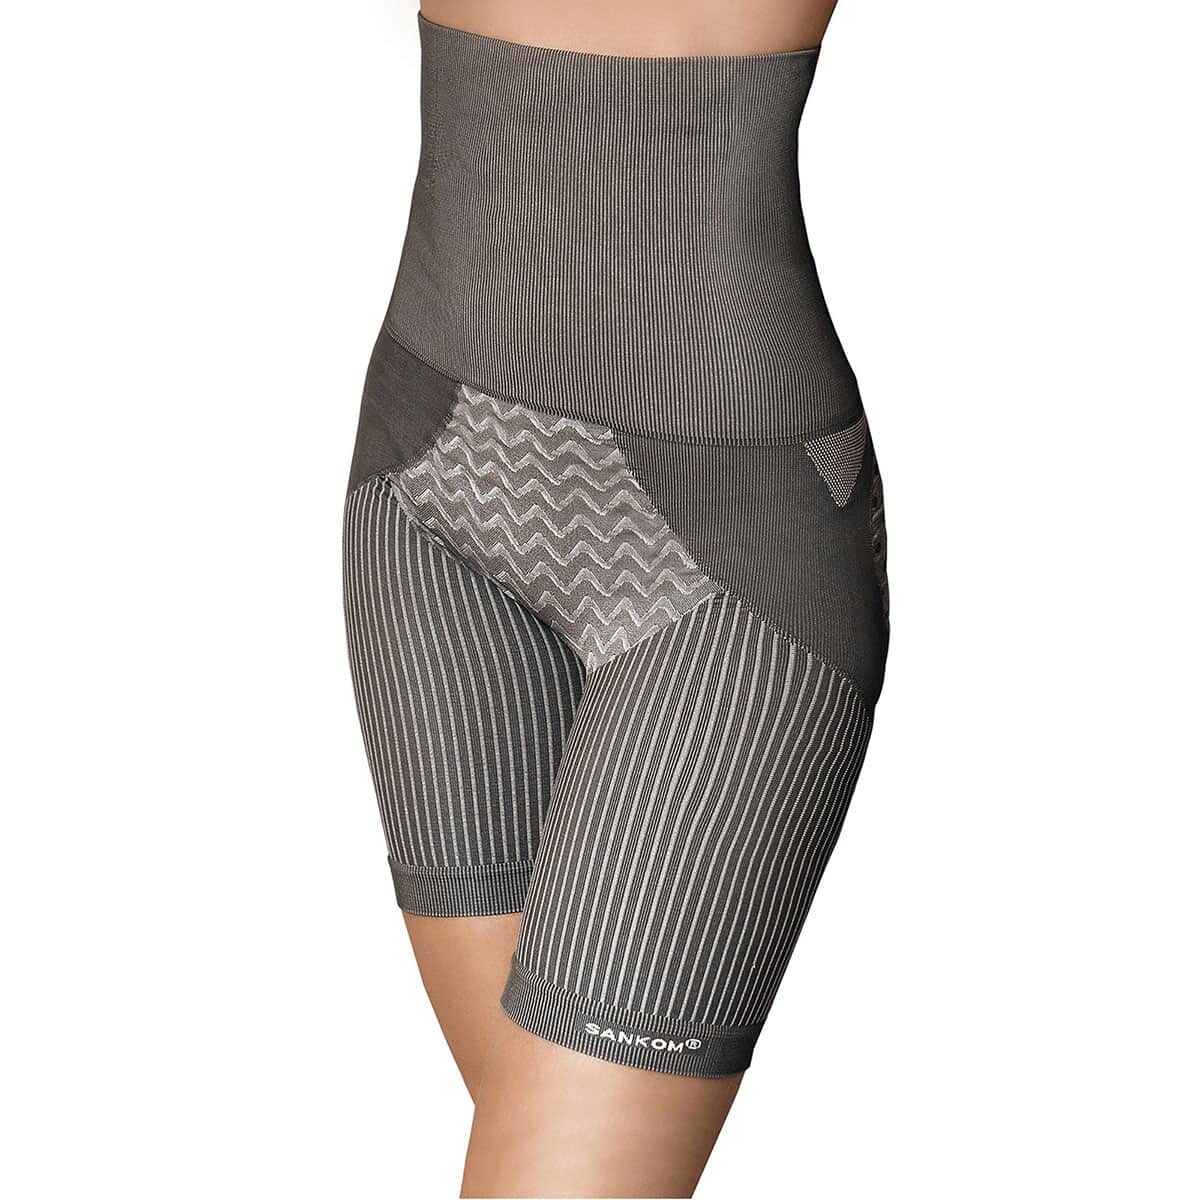 Sankom Patent Mid-Thigh Shaper with Bamboo Fibers - XS | Gray  image number 0